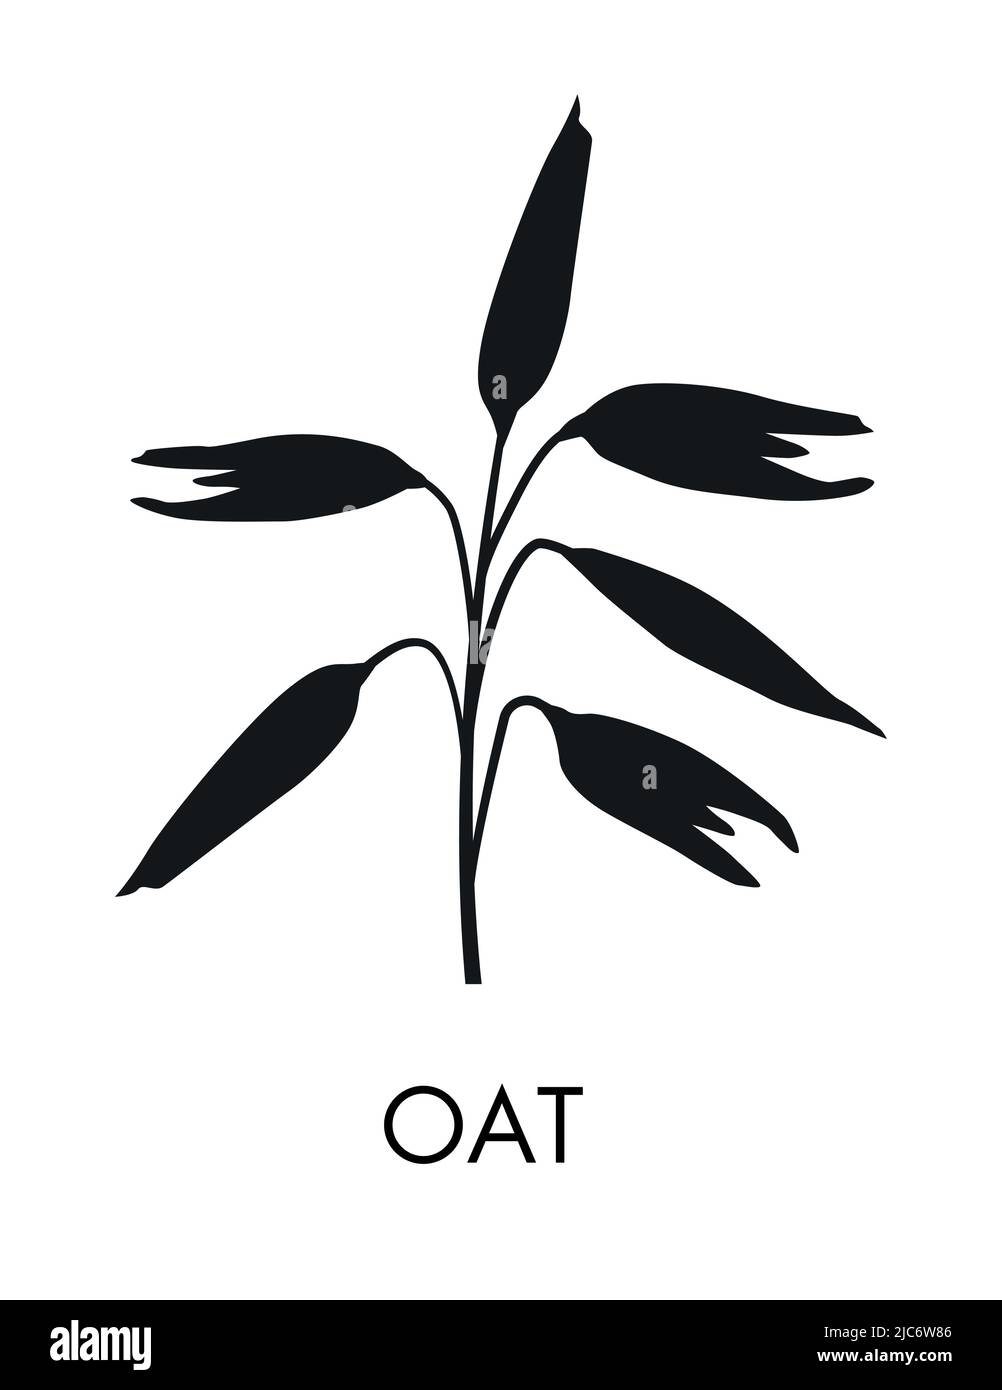 Ear of oat symbols oats agriculture vector illustration icon Stock Vector